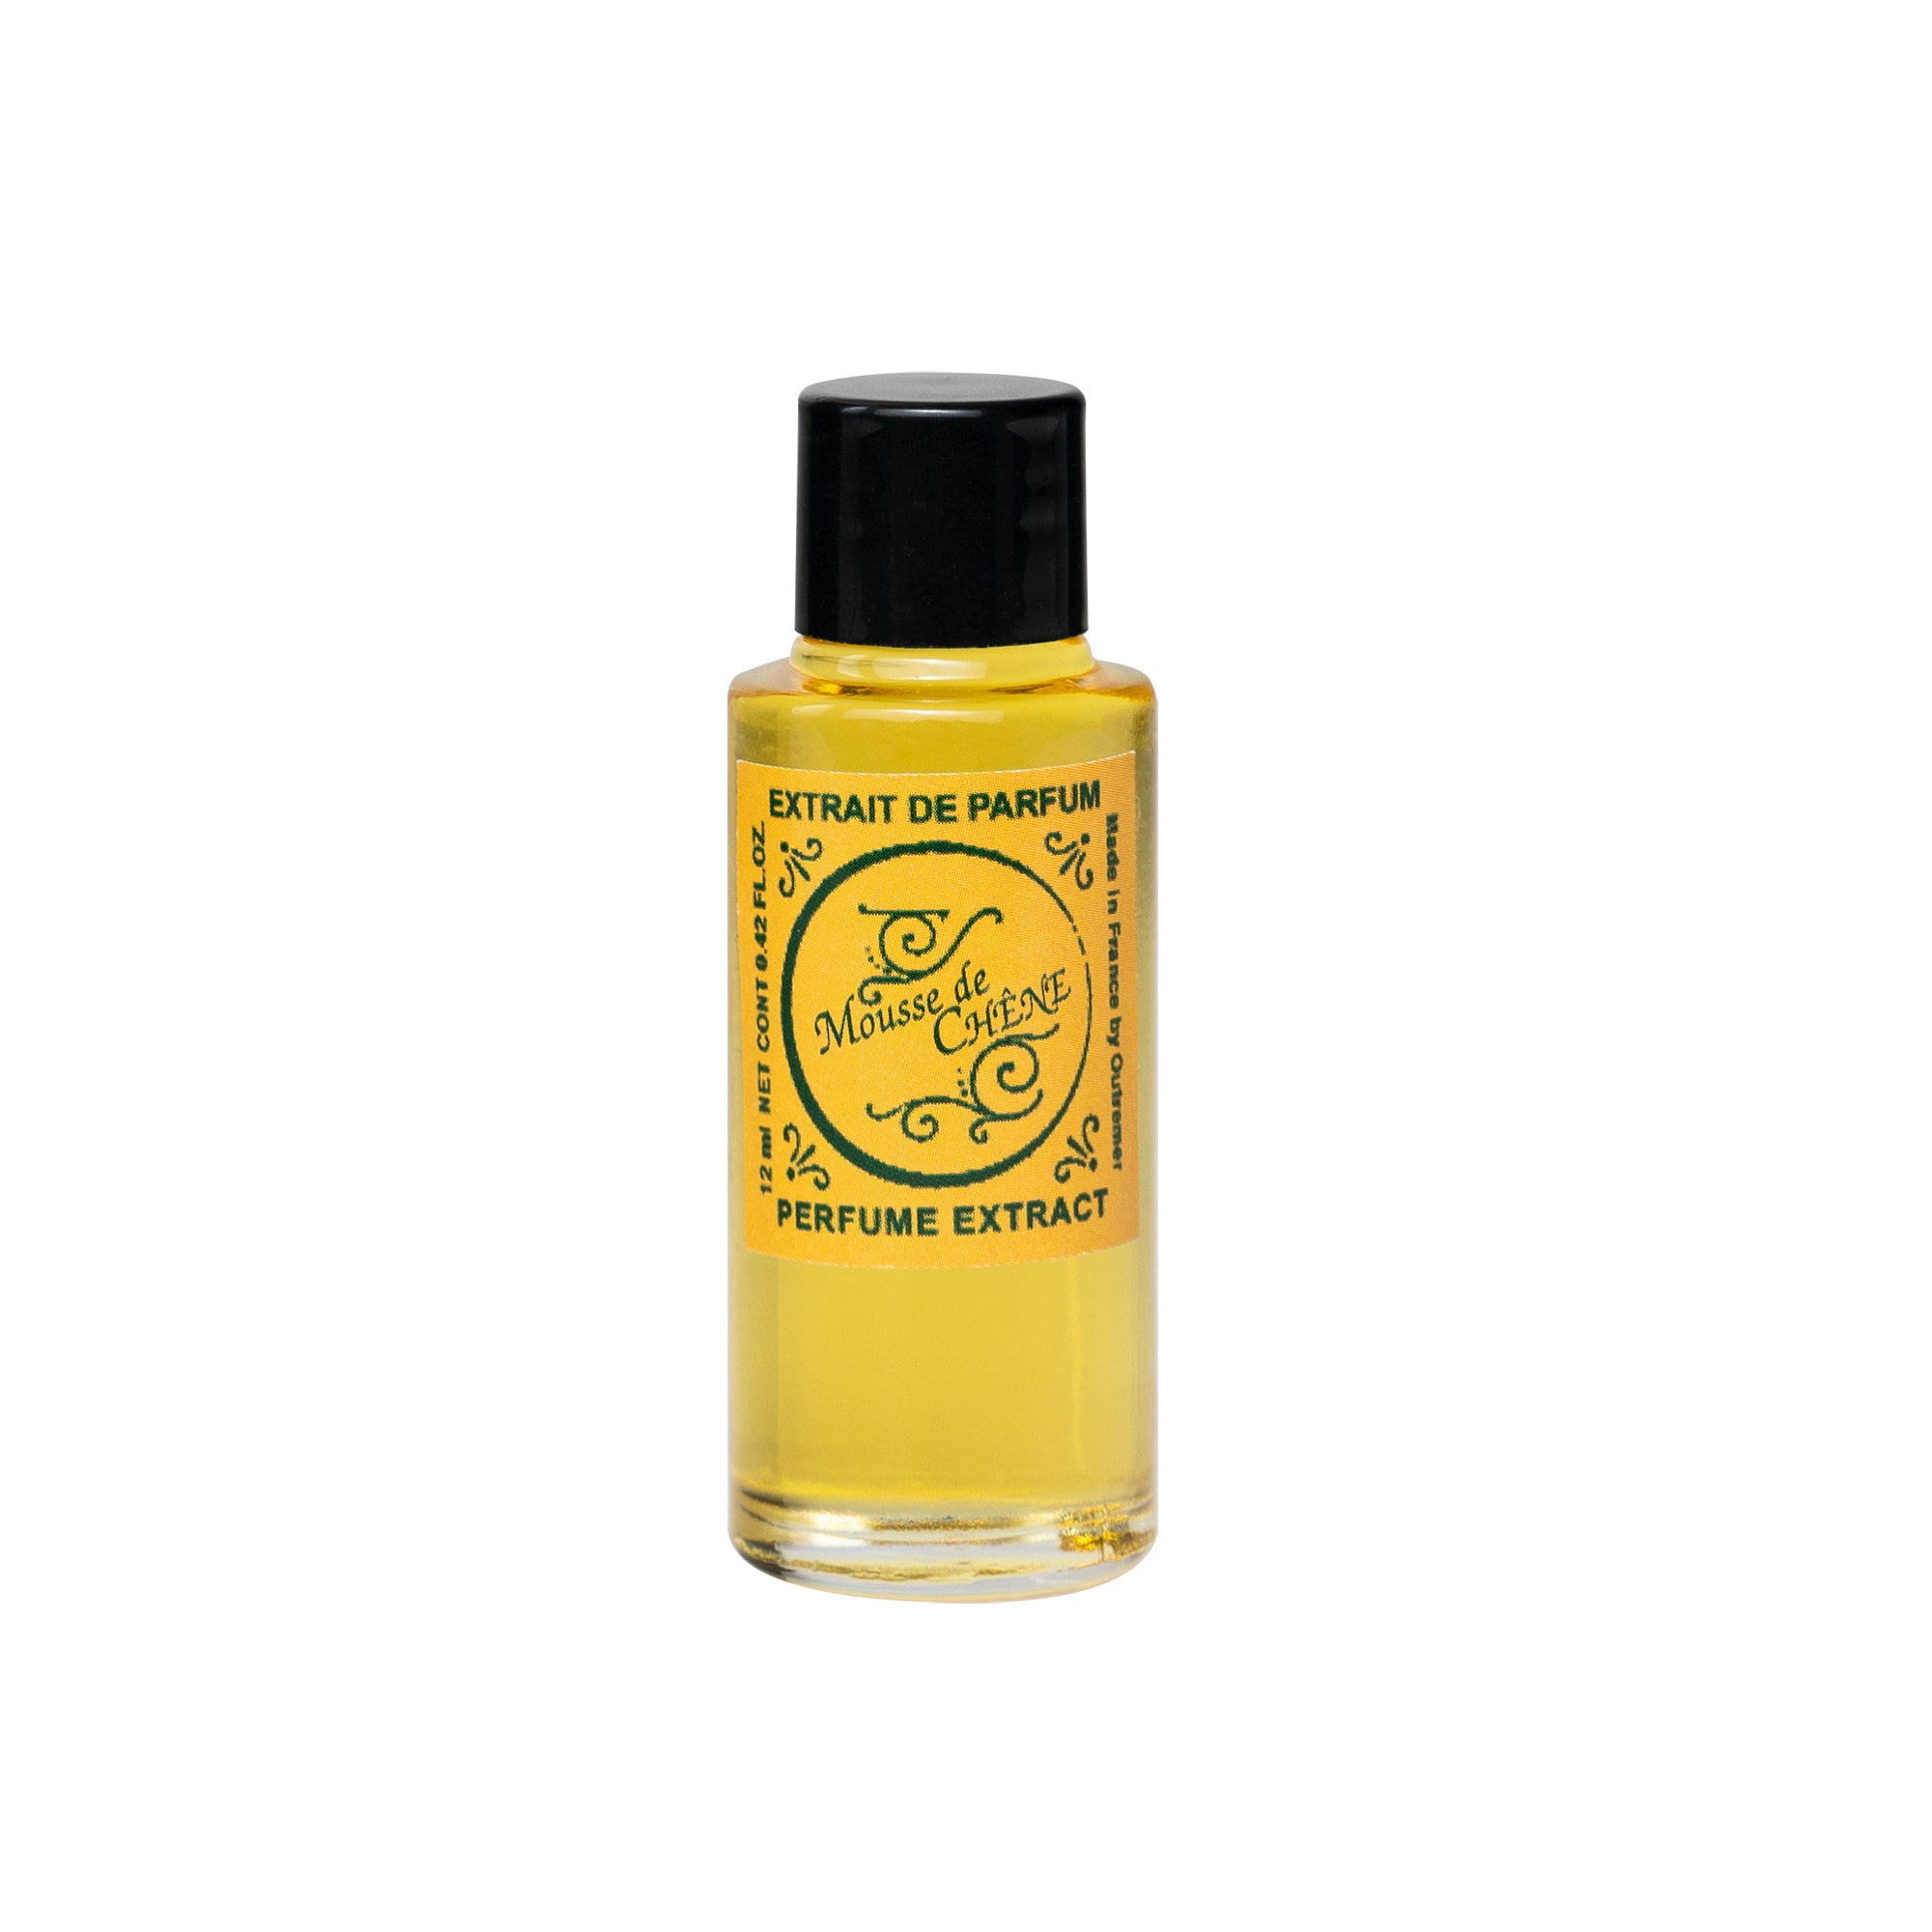 Outremer Mousse de Chene Perfume Extract (12 ml) – Smallflower